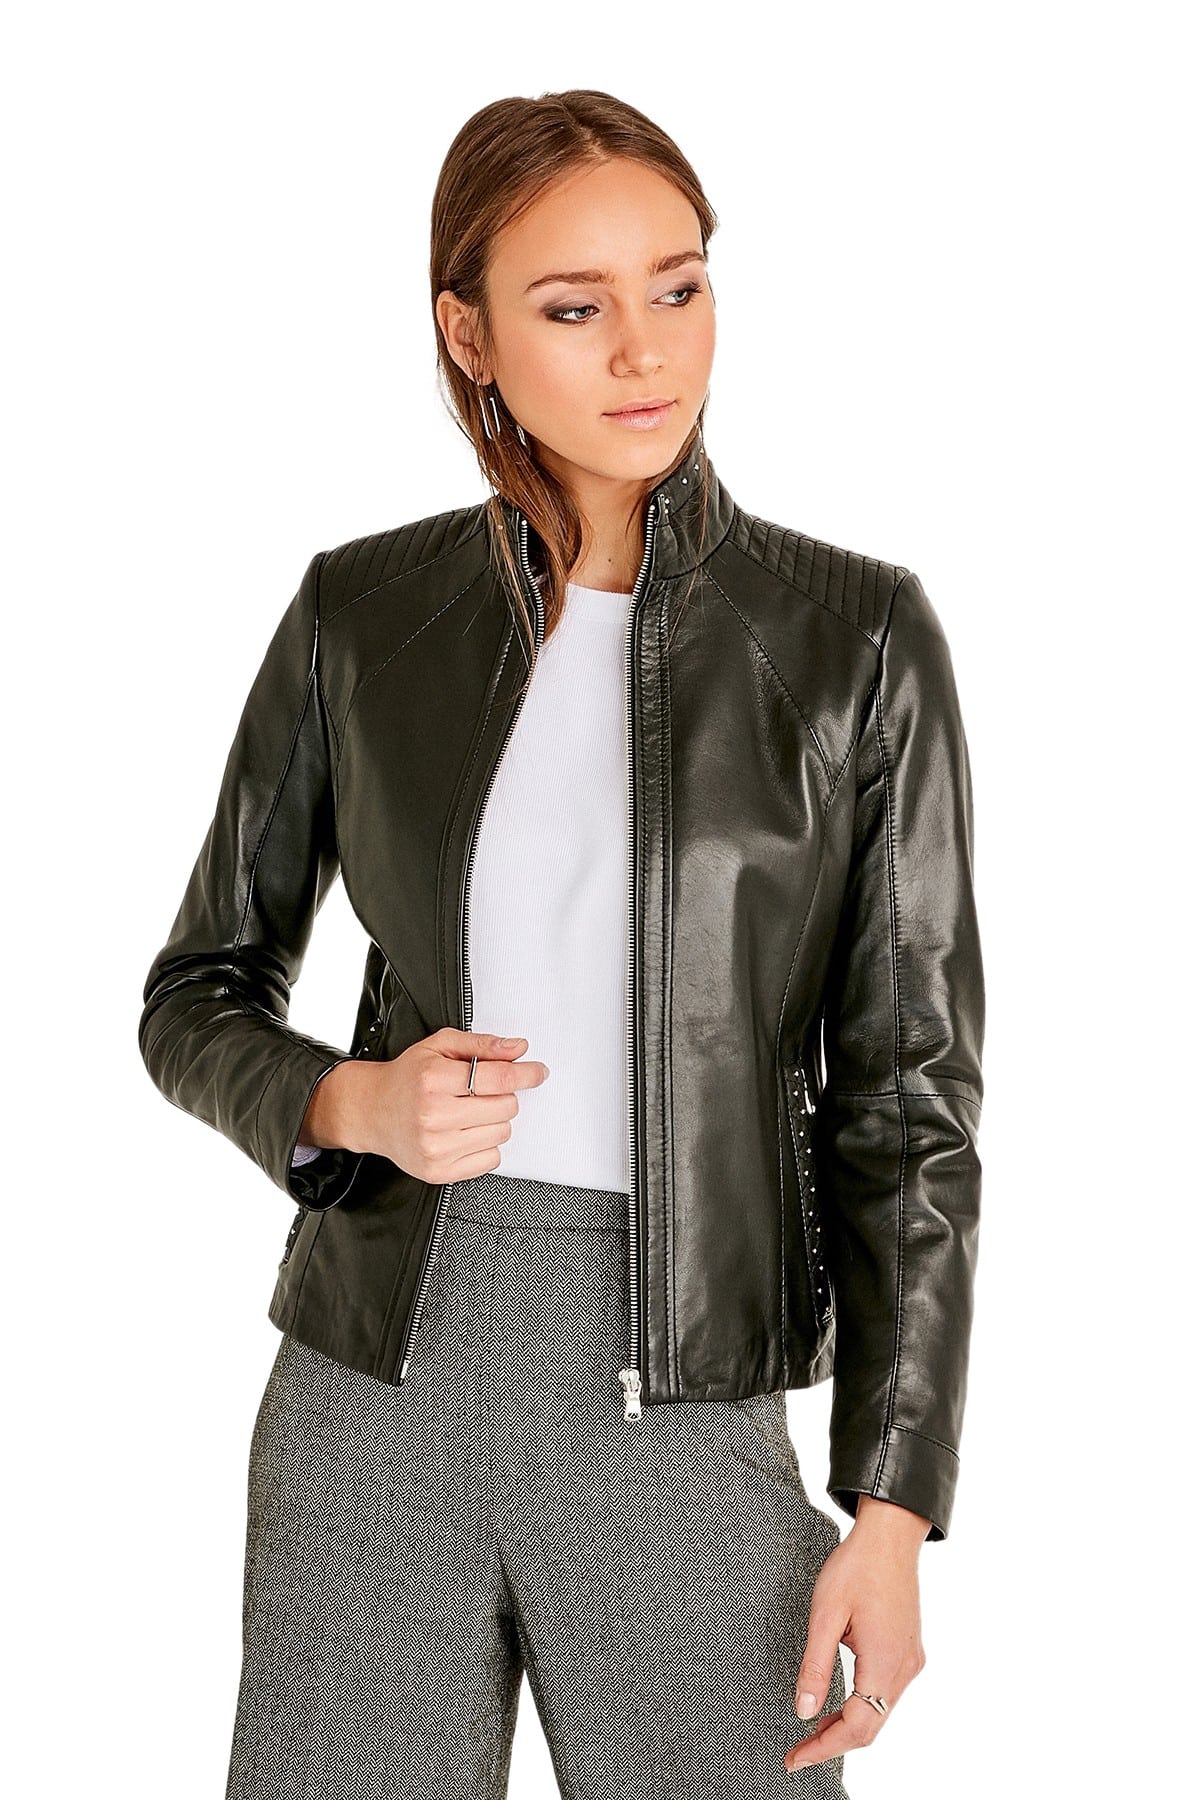 Chessie King Women's 100 % Real Black Leather Jacket